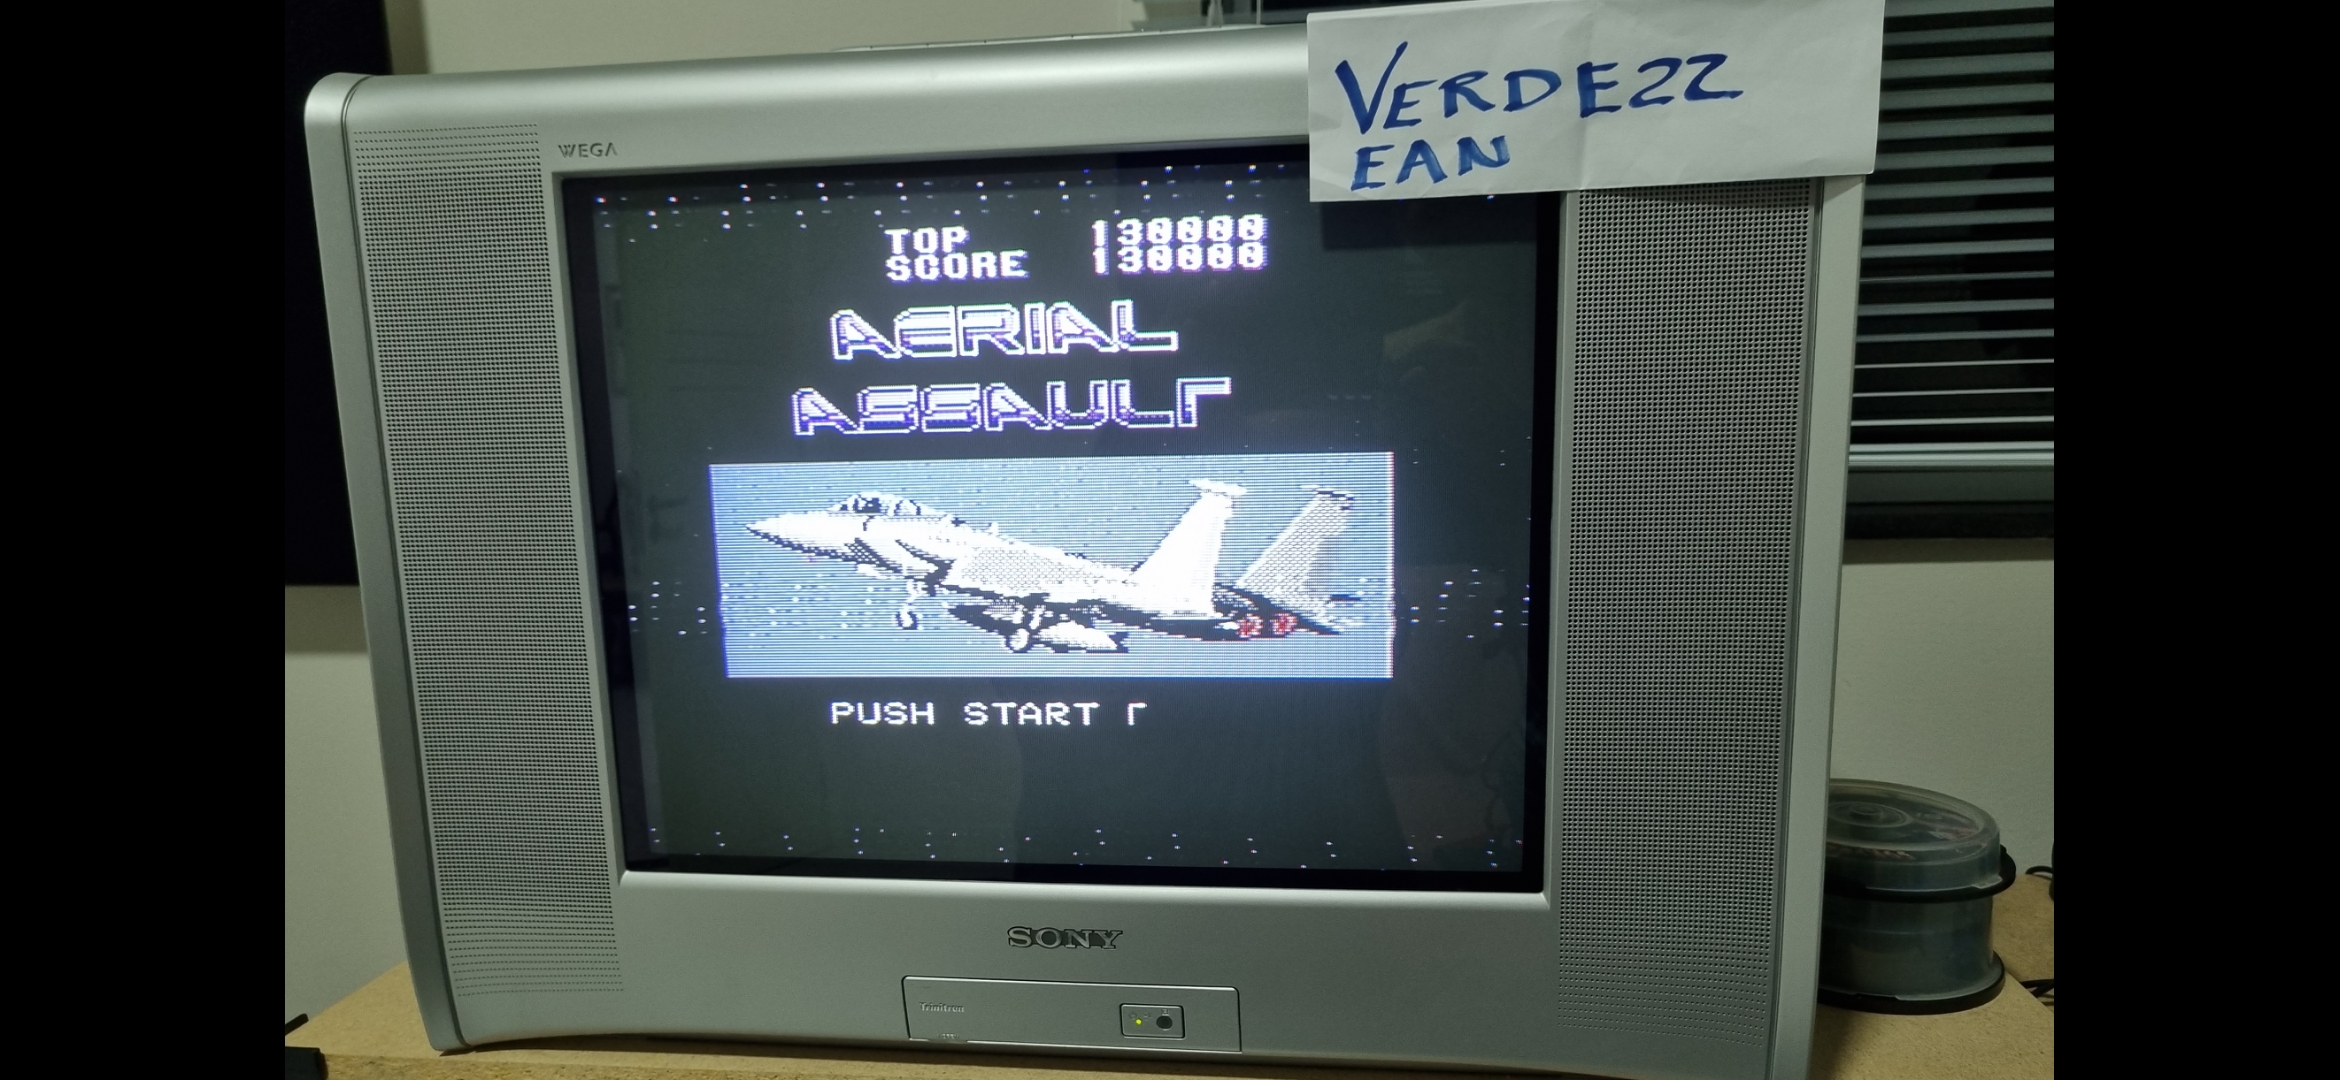 Aerial Assault 130,000 points